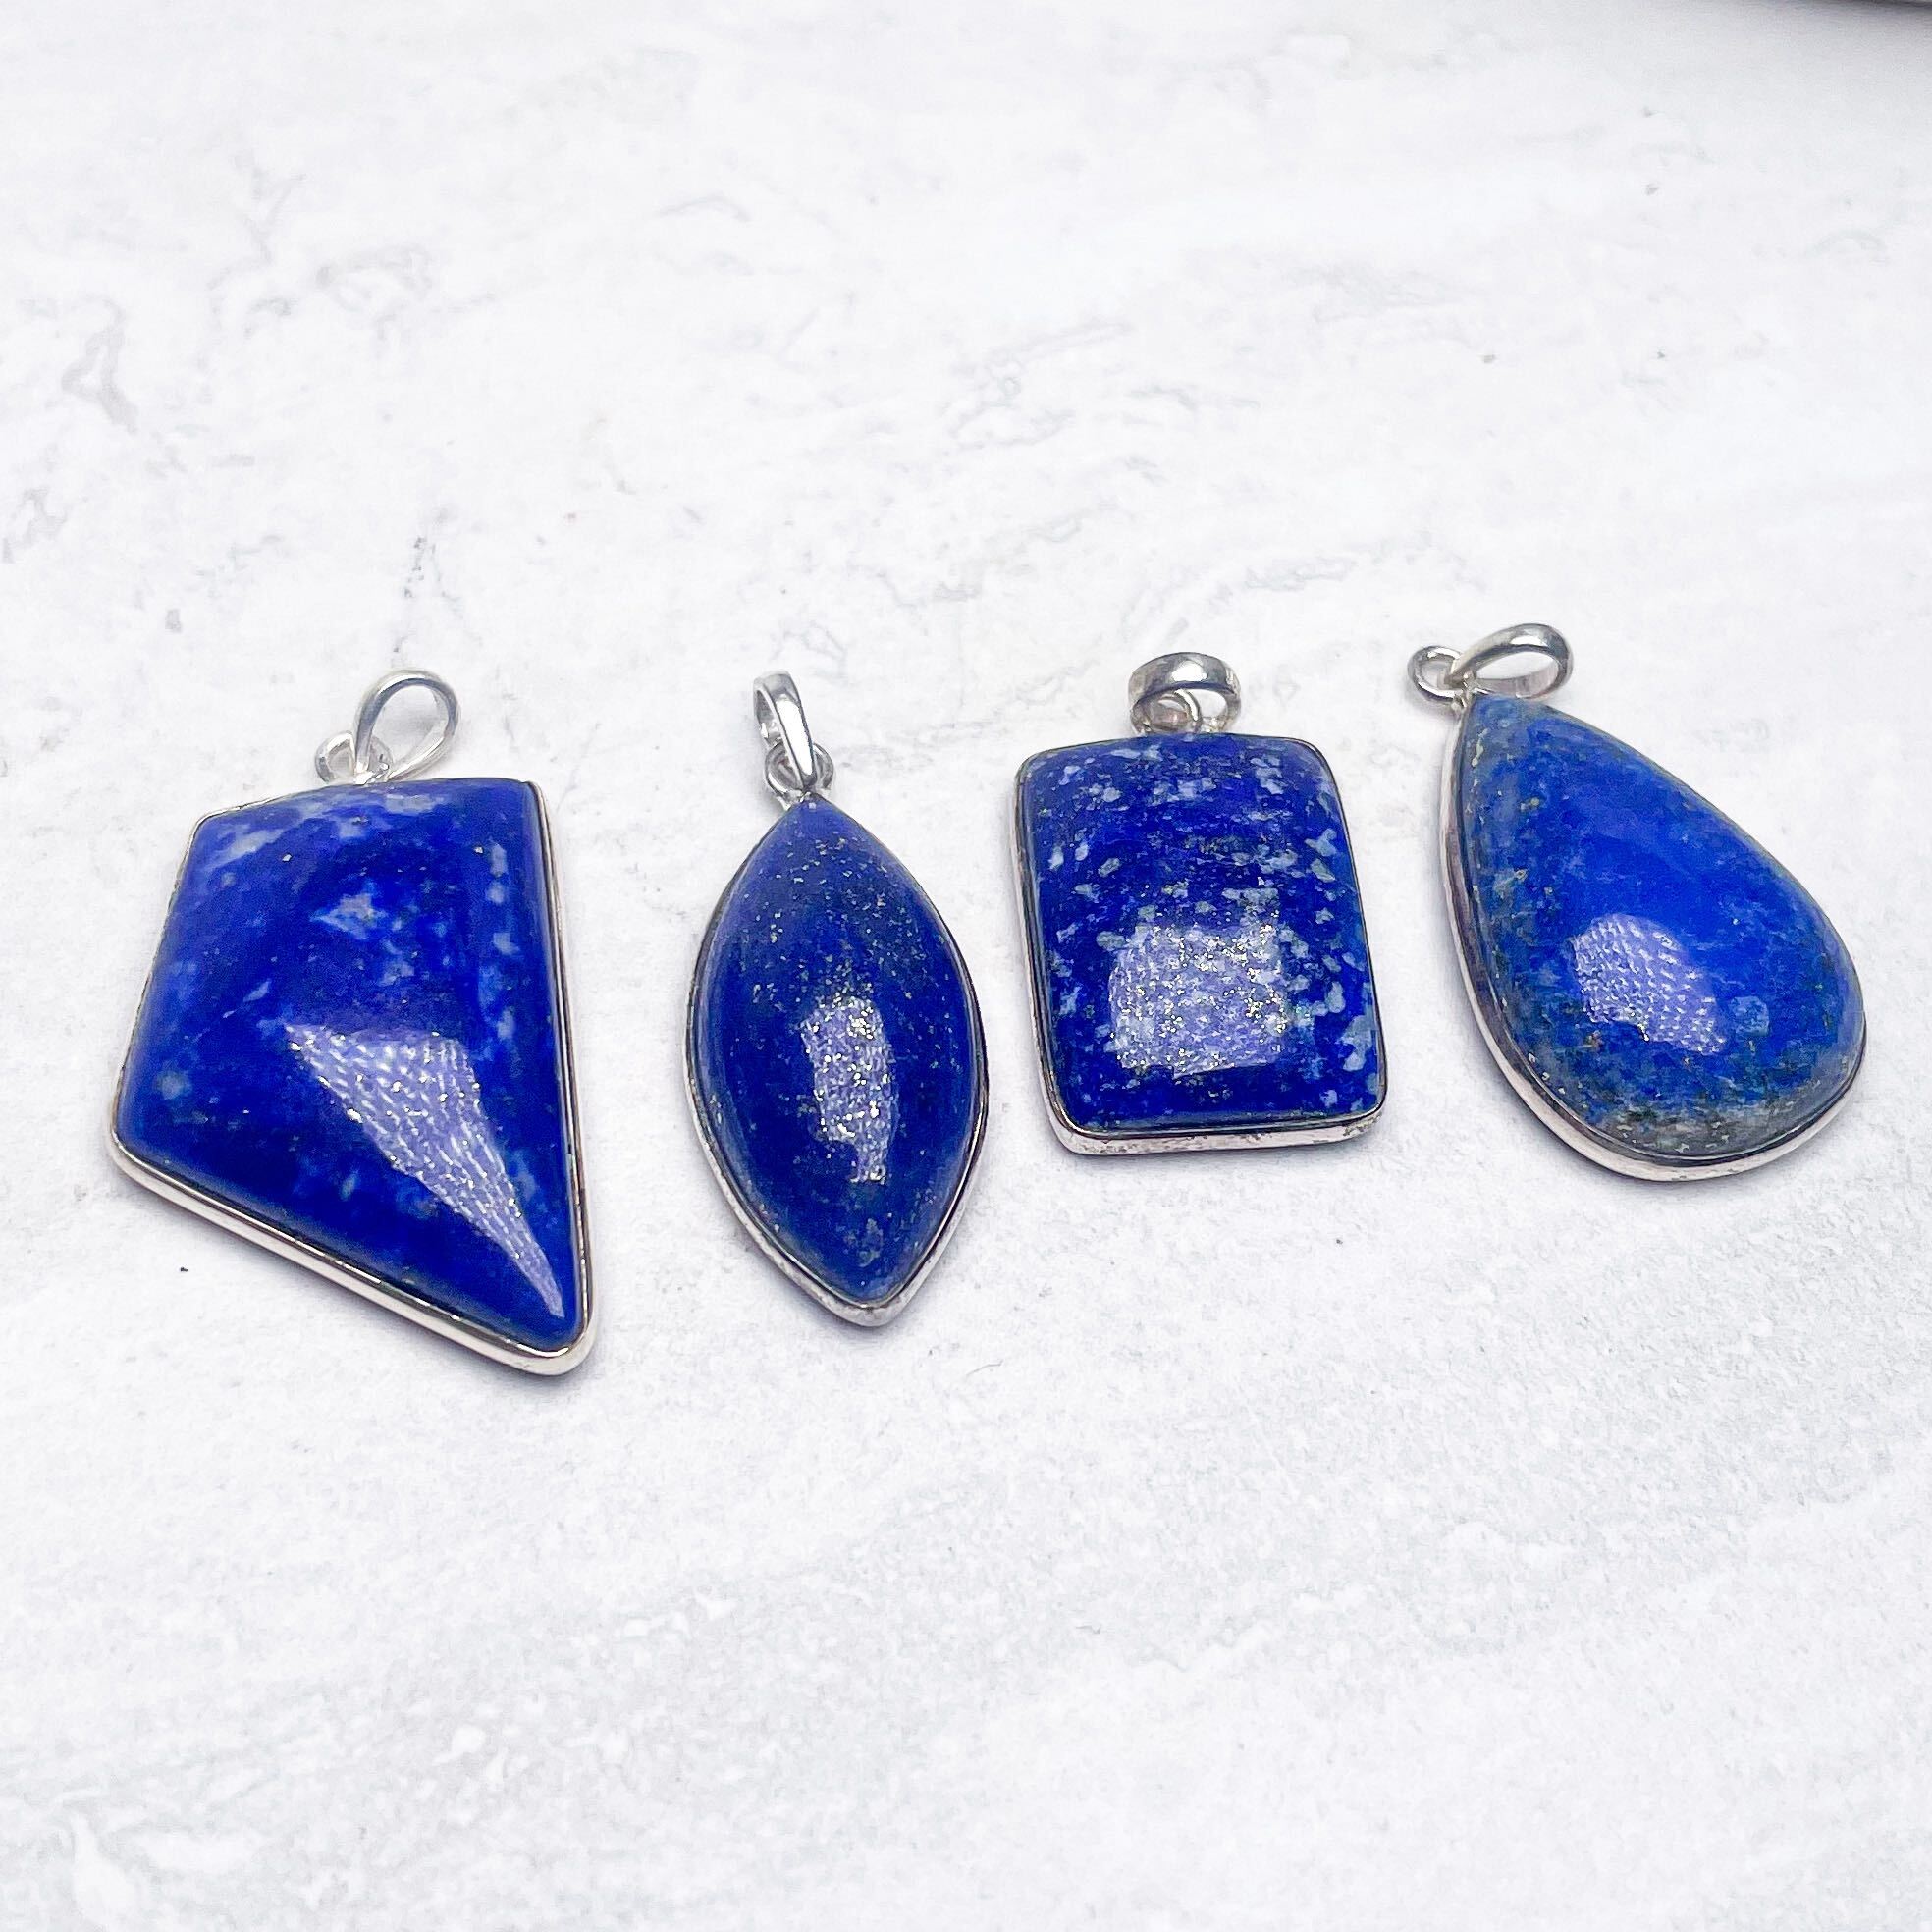 Crystal Pendants - Various Stones and Sizes